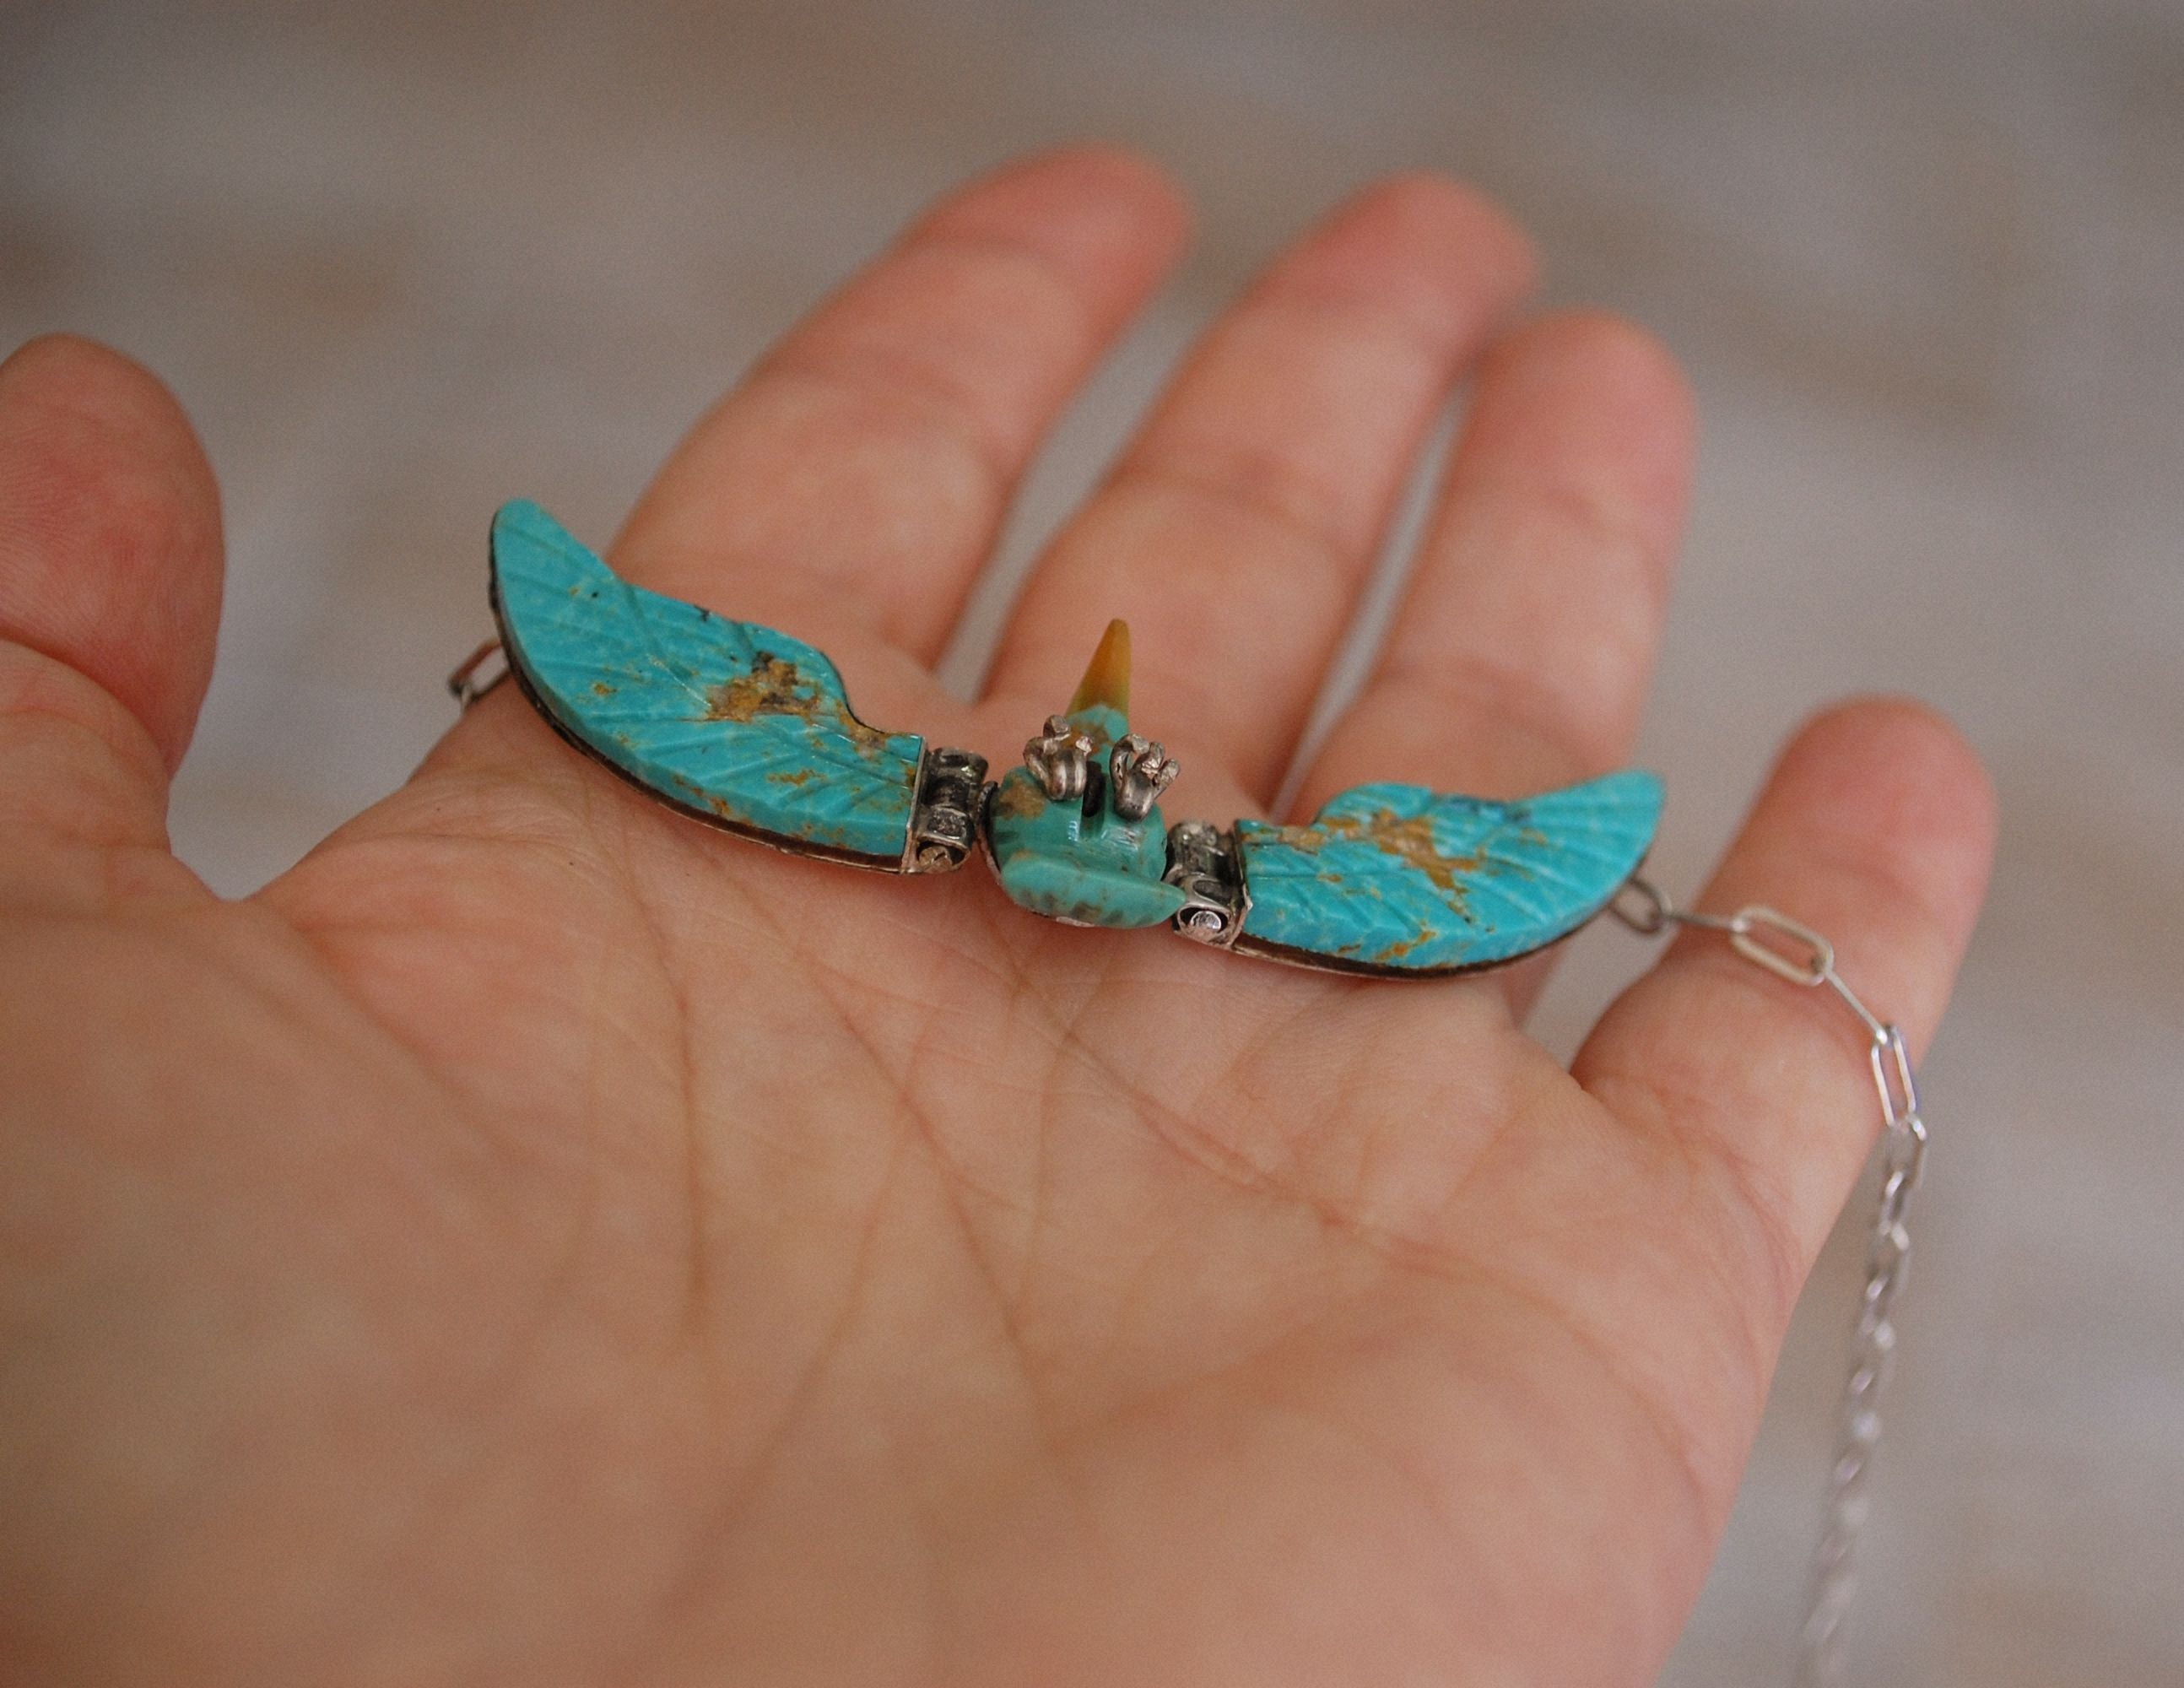 Navajo Turquoise Eagle Necklace - Signed F. Tom